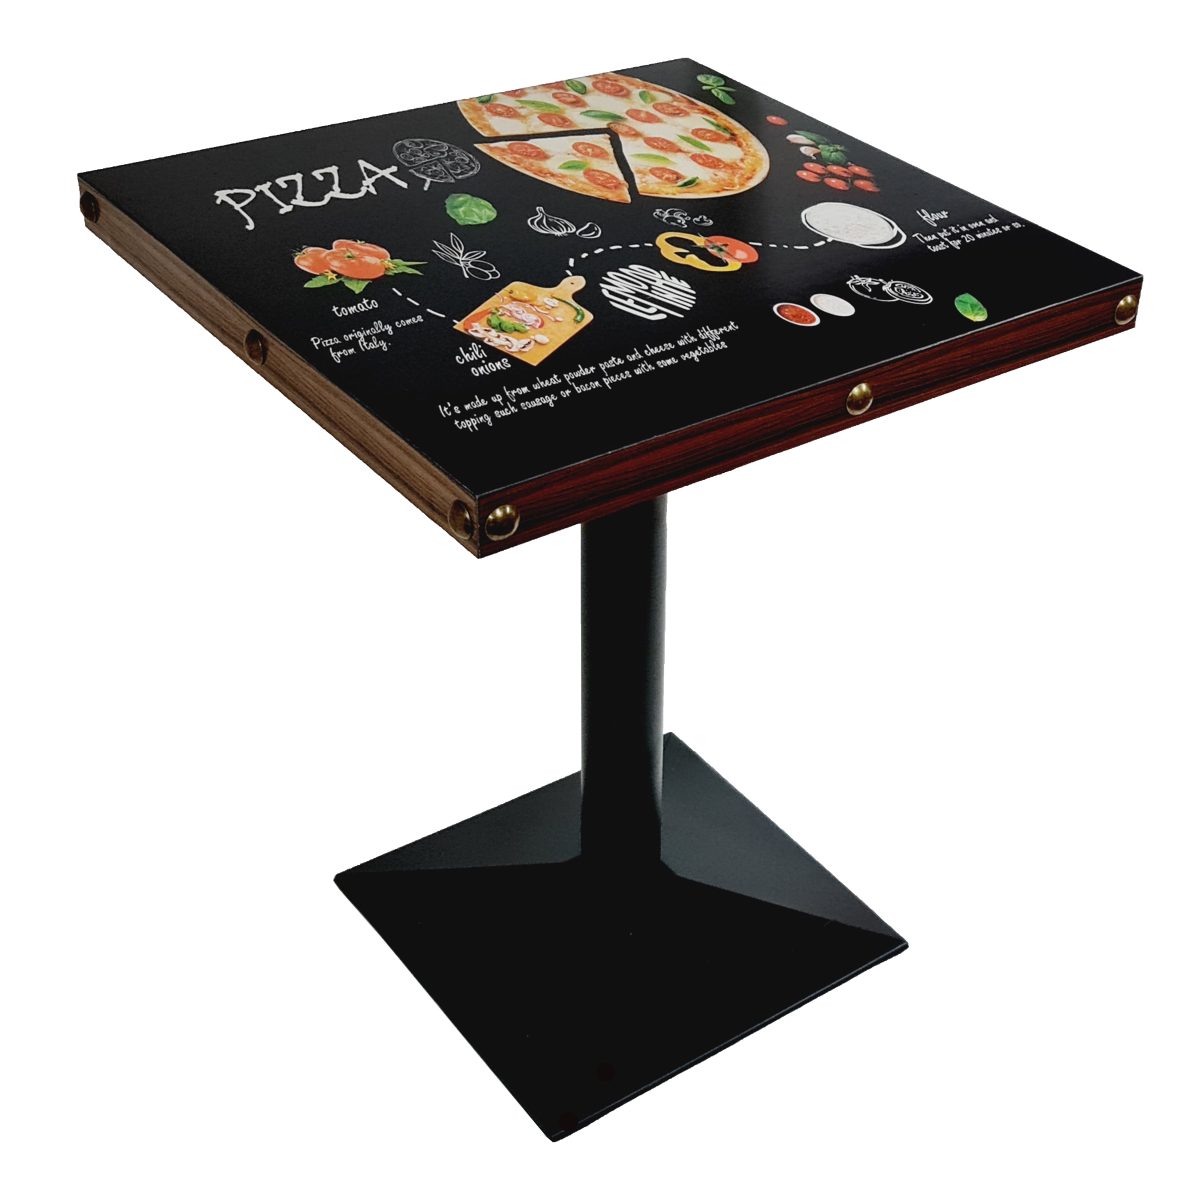 Custom Printed Tables best choice for pizza shops